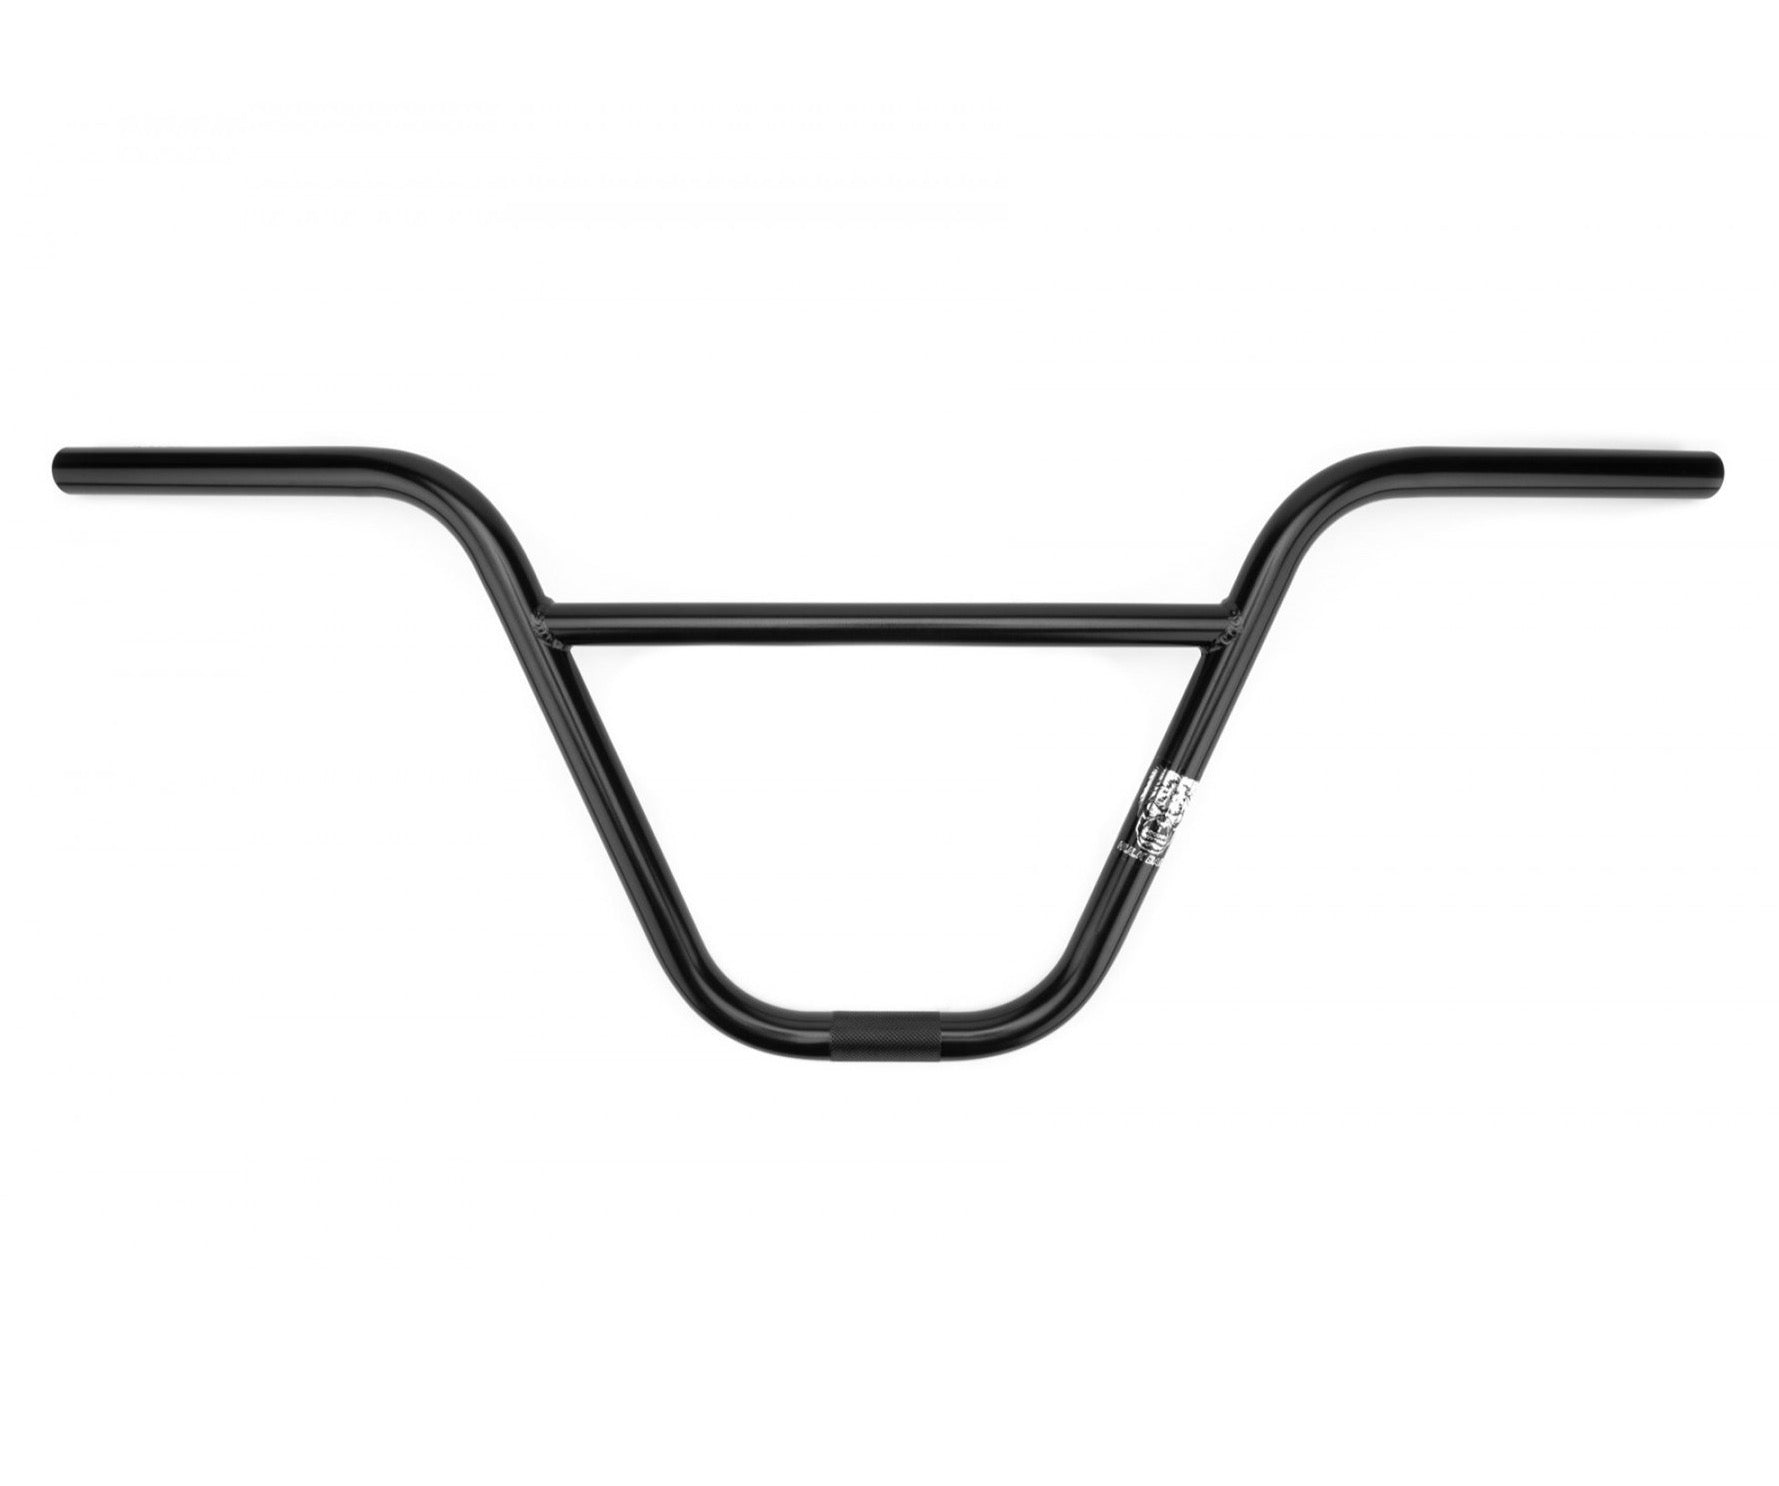 front view of the Kink hulk handlebars in black